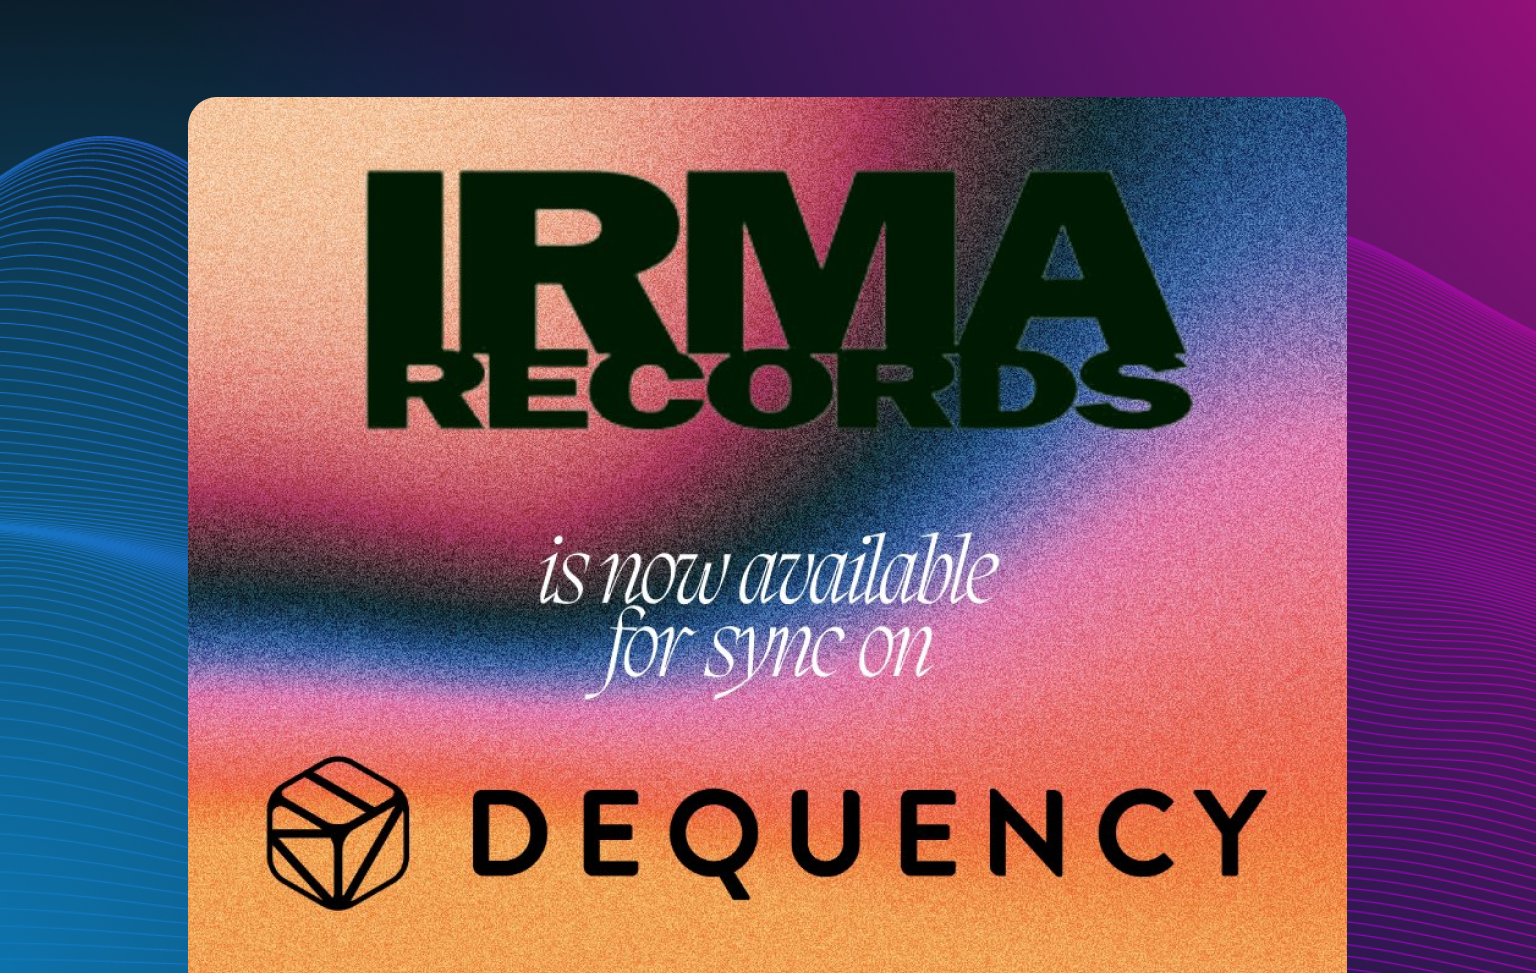 IRMA Records expands its sync licensing horizons to the Web3 universe through integration with Dequency